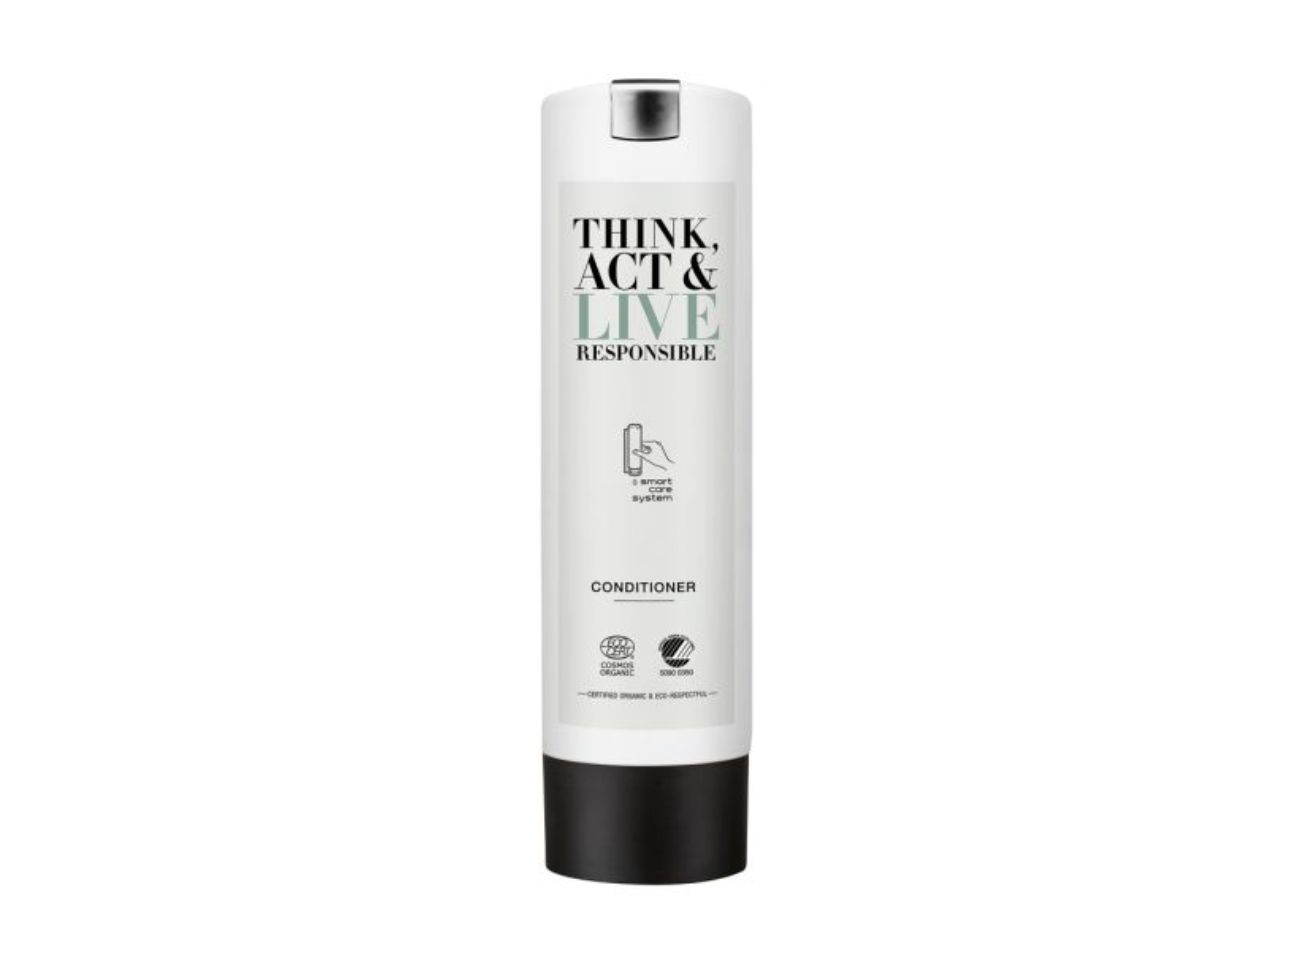 Think Act & Live Responsible - Conditioner, Smart Care, 300ml